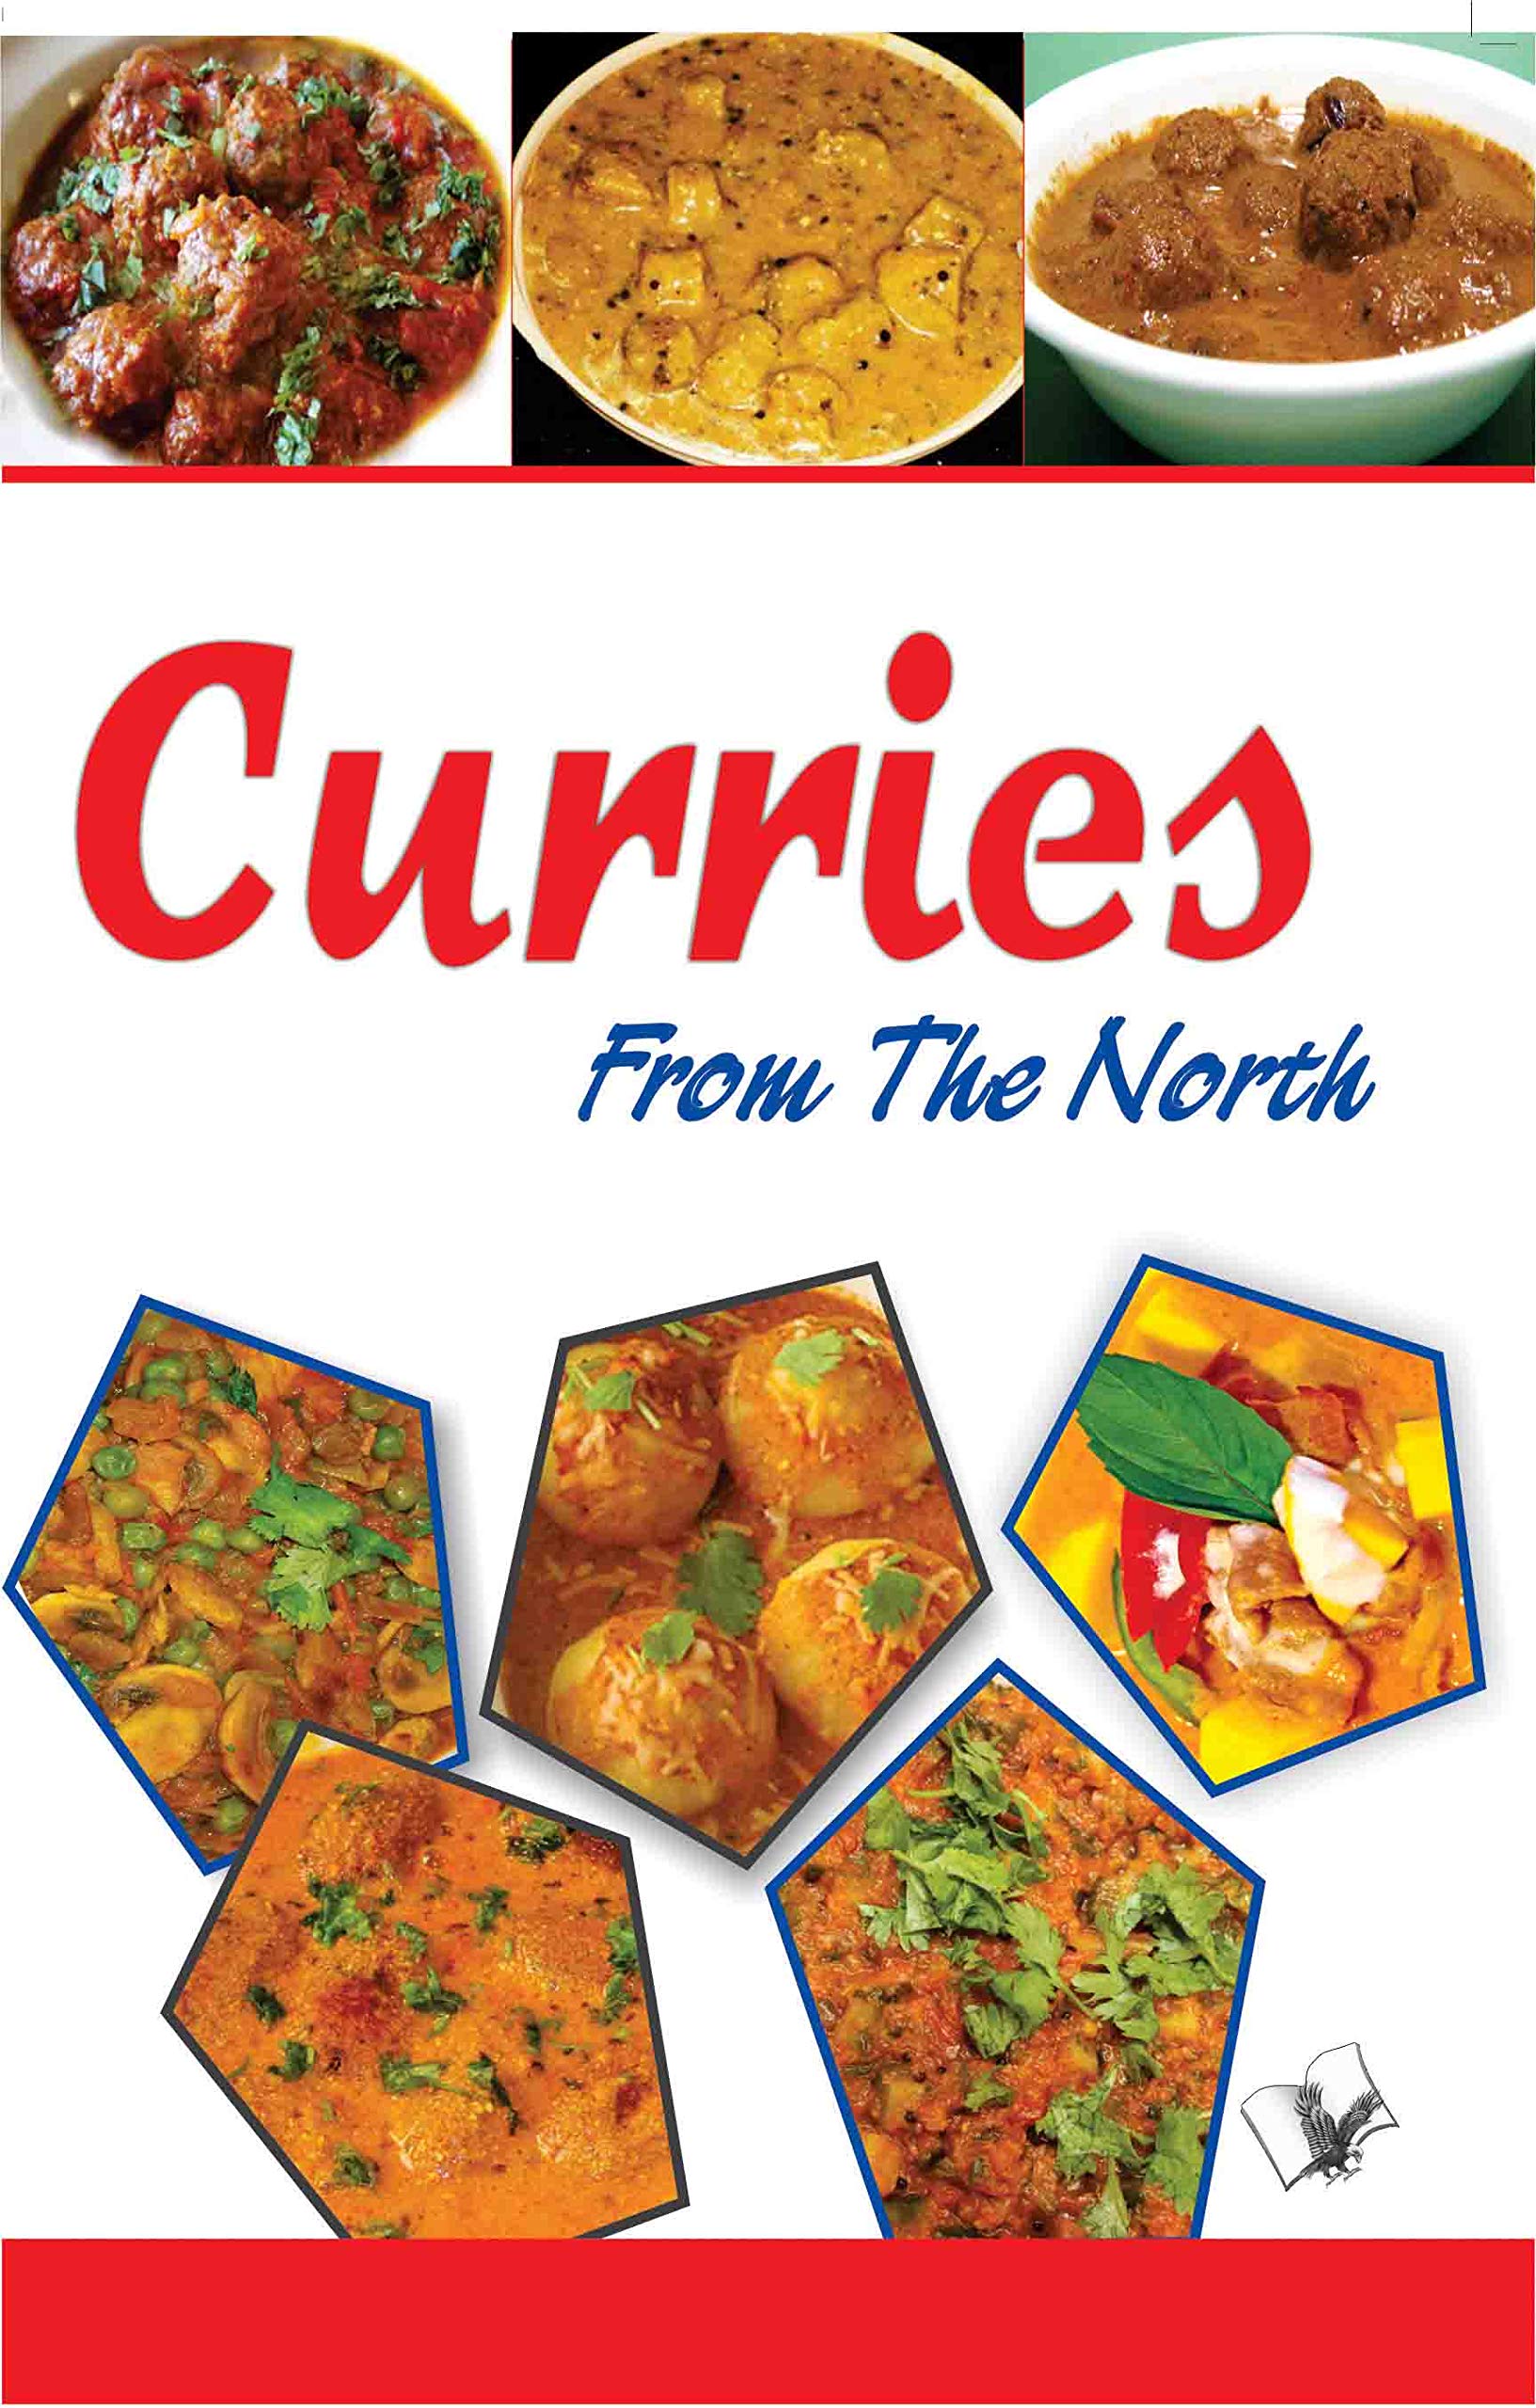 CURRIES FROM THE NORTH: HEALTHY & DELECTABLE NORTH INDIAN CURRIES